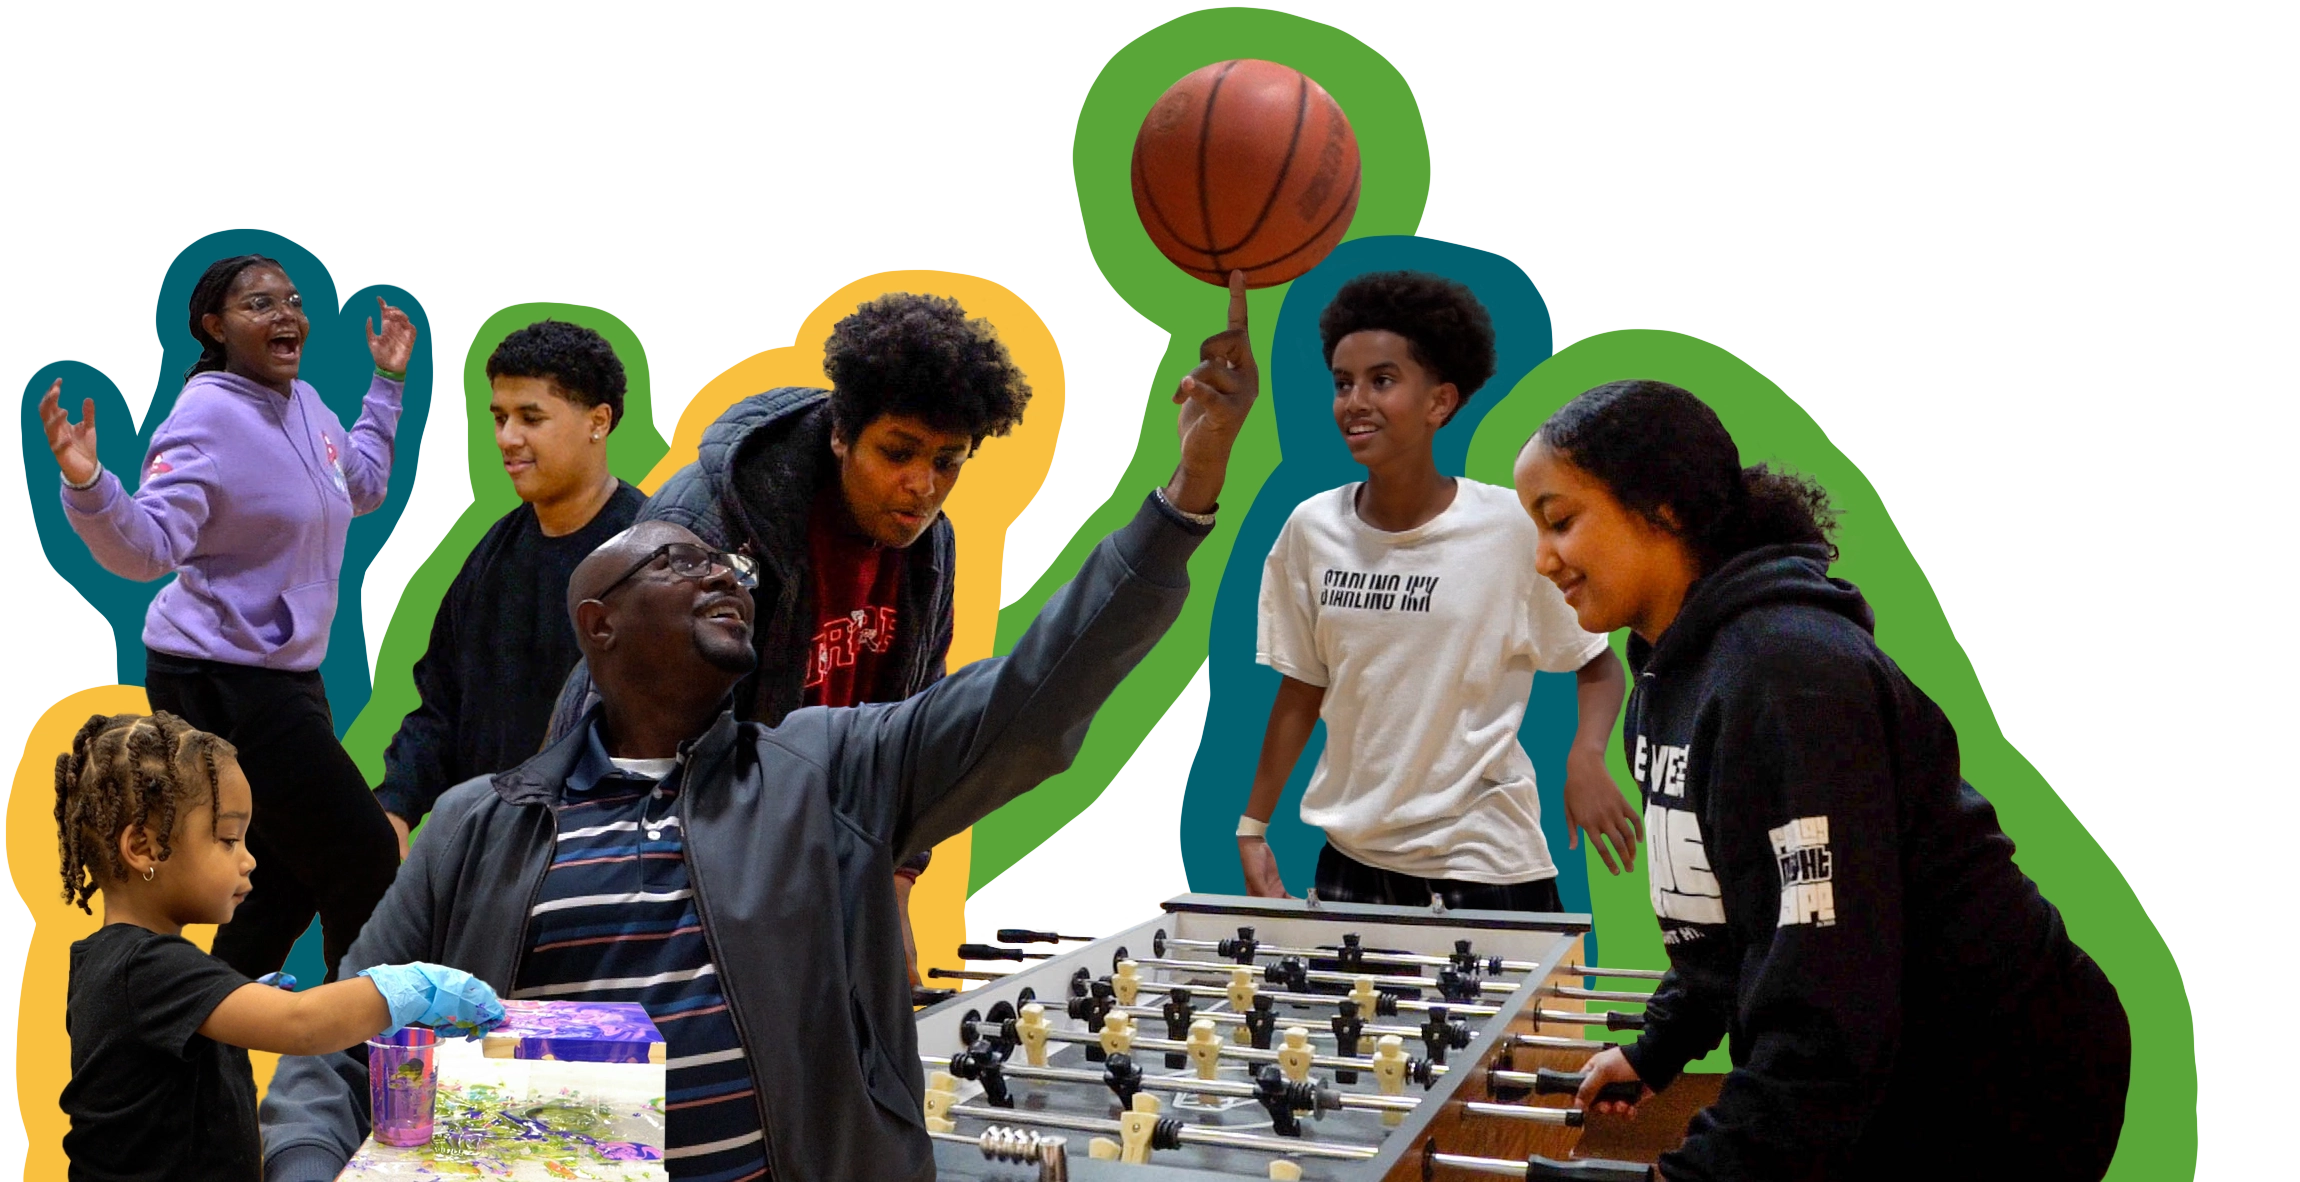 Collage of people of all ages participating in different activities such as painting, basketball, foosball, dancing, etc.